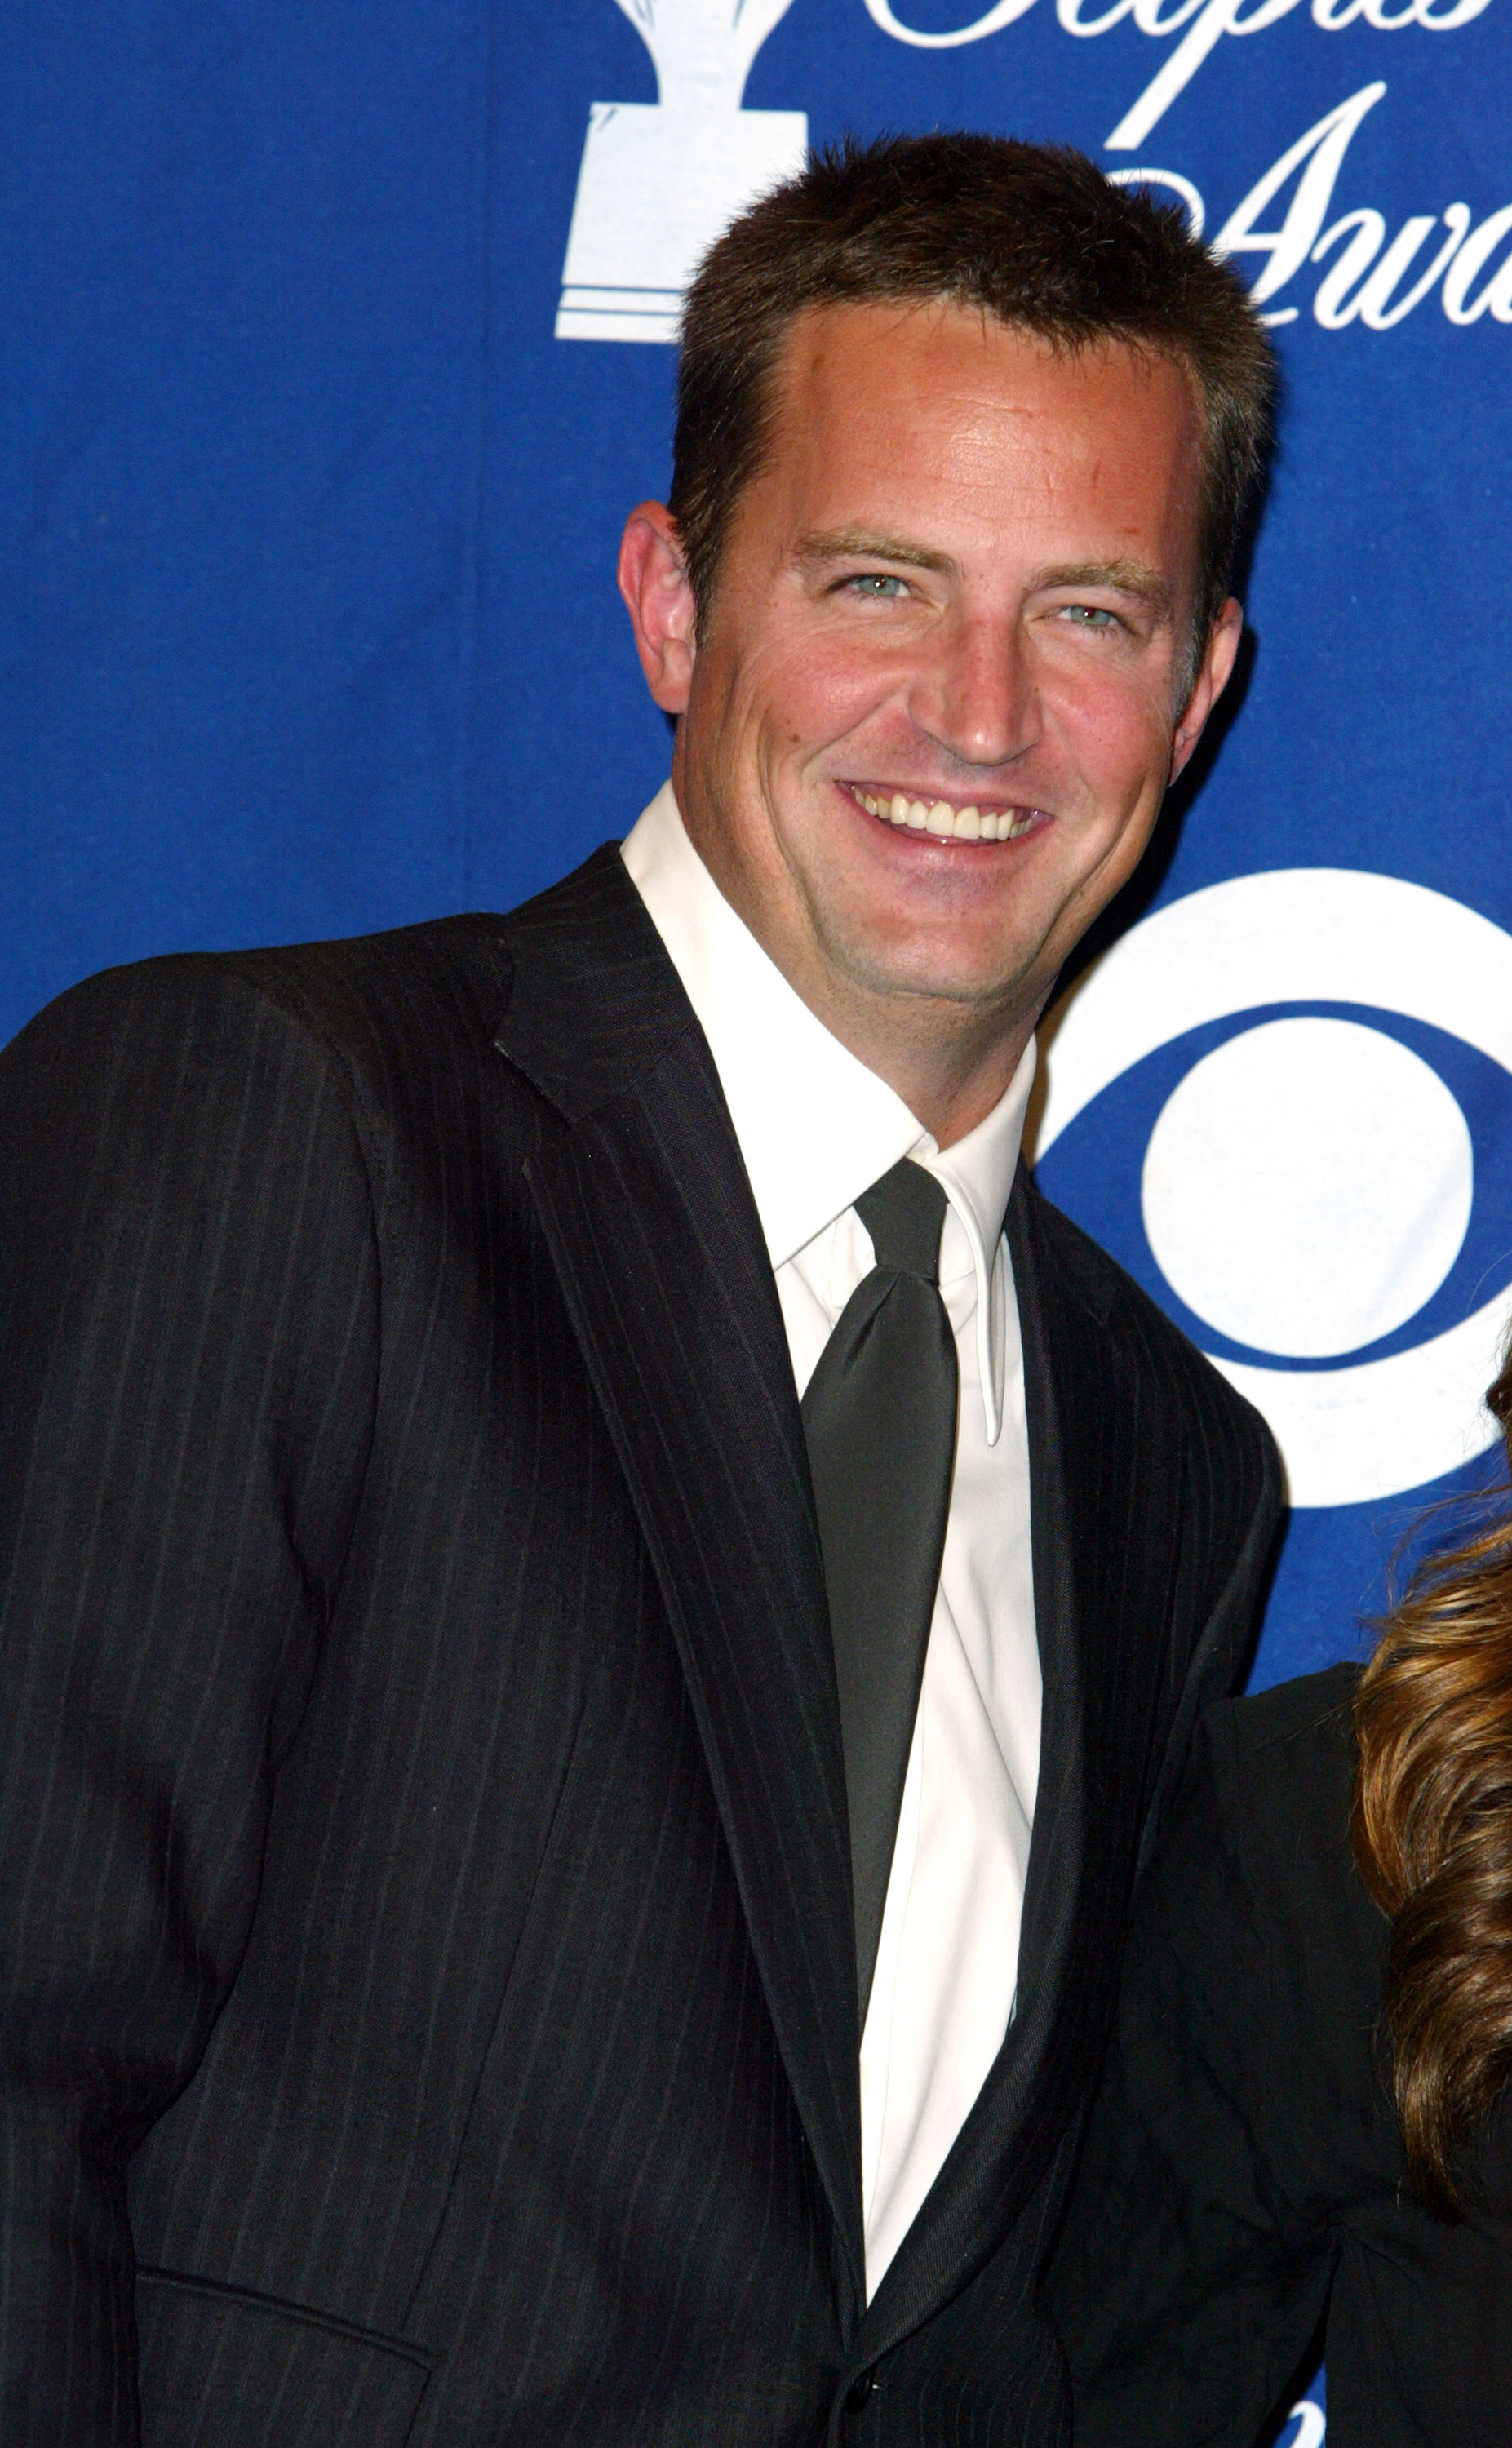 Matthew Perry at the 29th People's Choice Awards in 2003 | Source: Getty Images